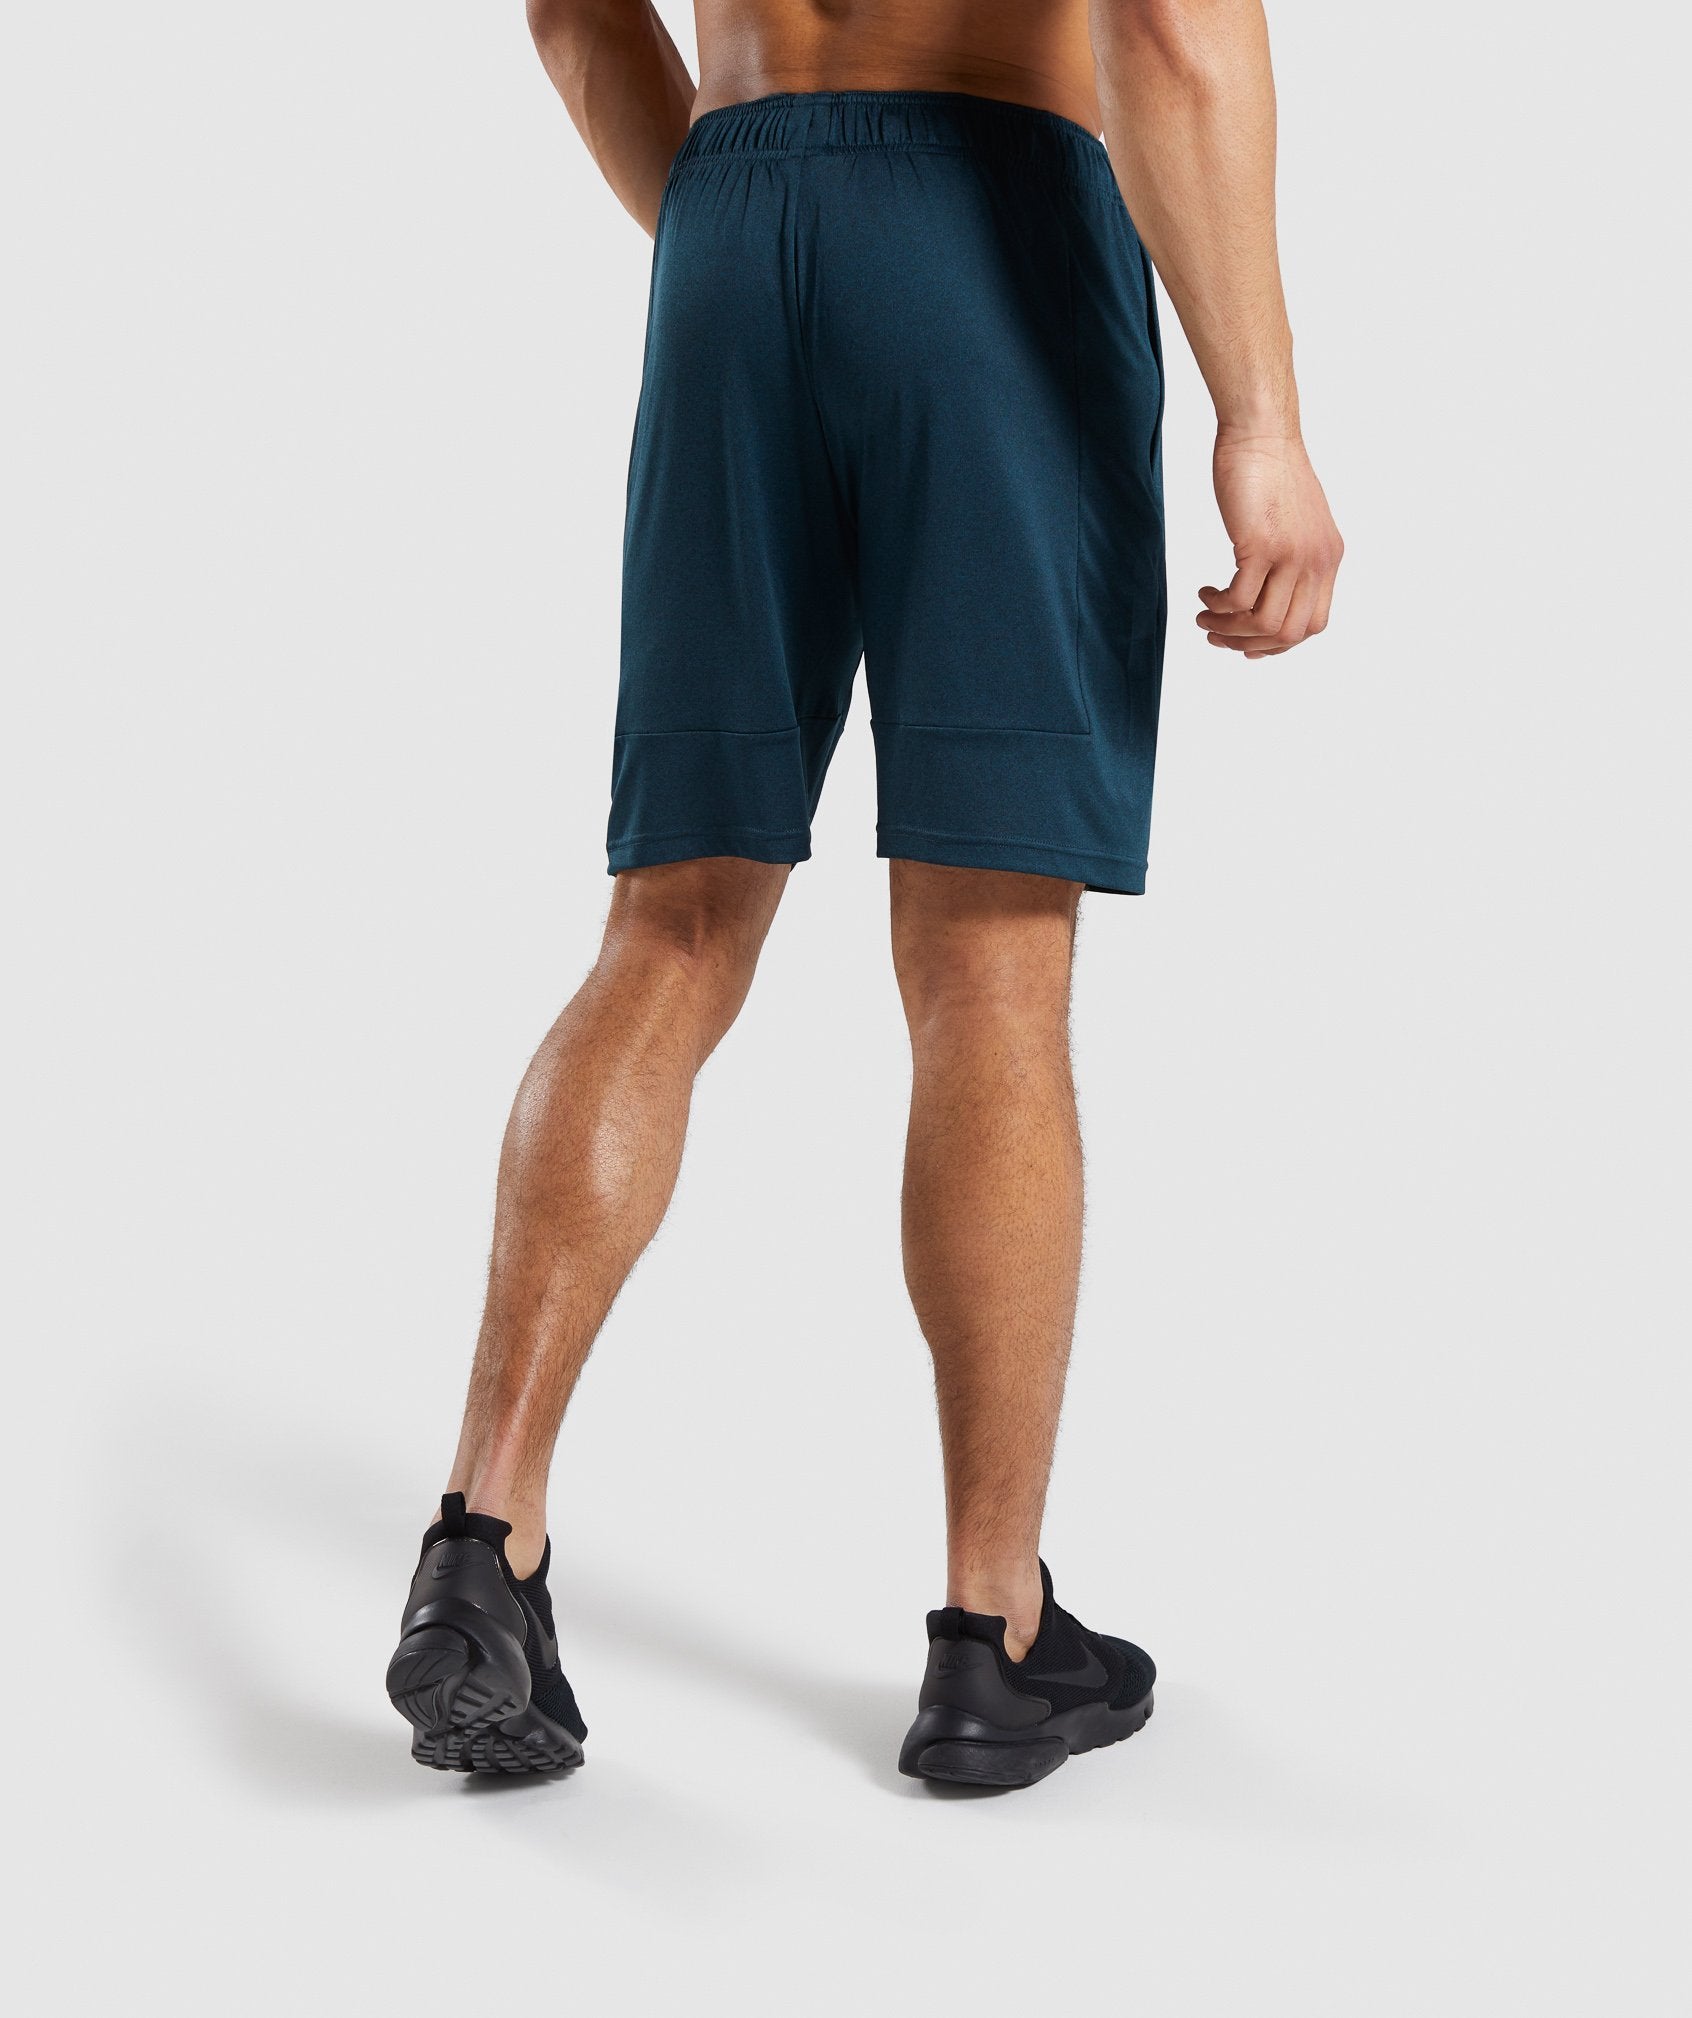 Element Shorts in Teal - view 2